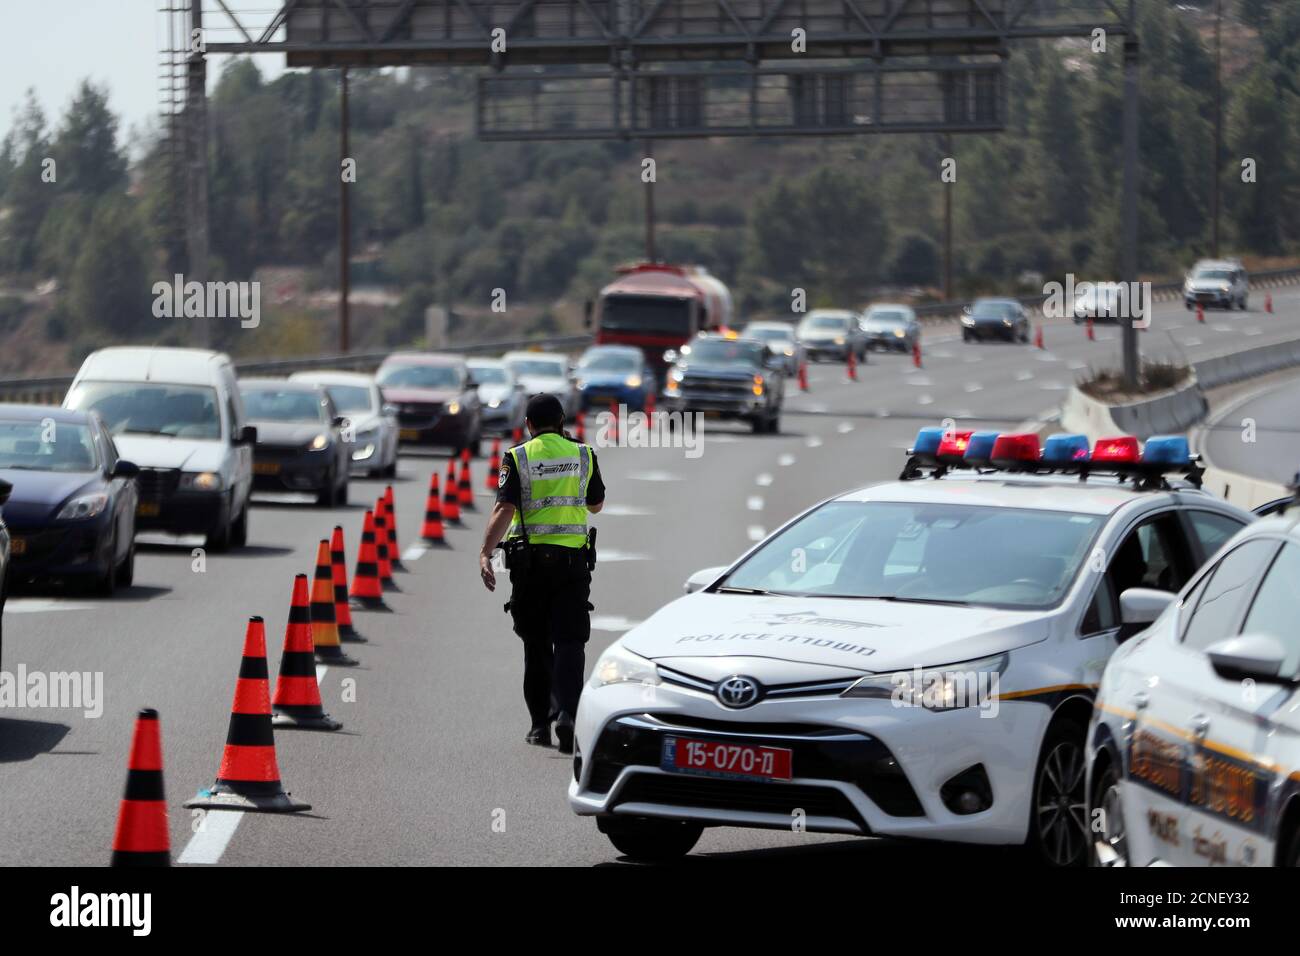 A policeman sets trafic control poles before Israel will enter a second nationwide lockdown amid a resurgence in new coronavirus disease (COVID-19) cases, forcing residents to stay mostly at home during the Jewish high-holiday season, on the main road leading to Jerusalem in Ein Hemd September 18, 2020. REUTERS/Ronen Zvulun Stock Photo